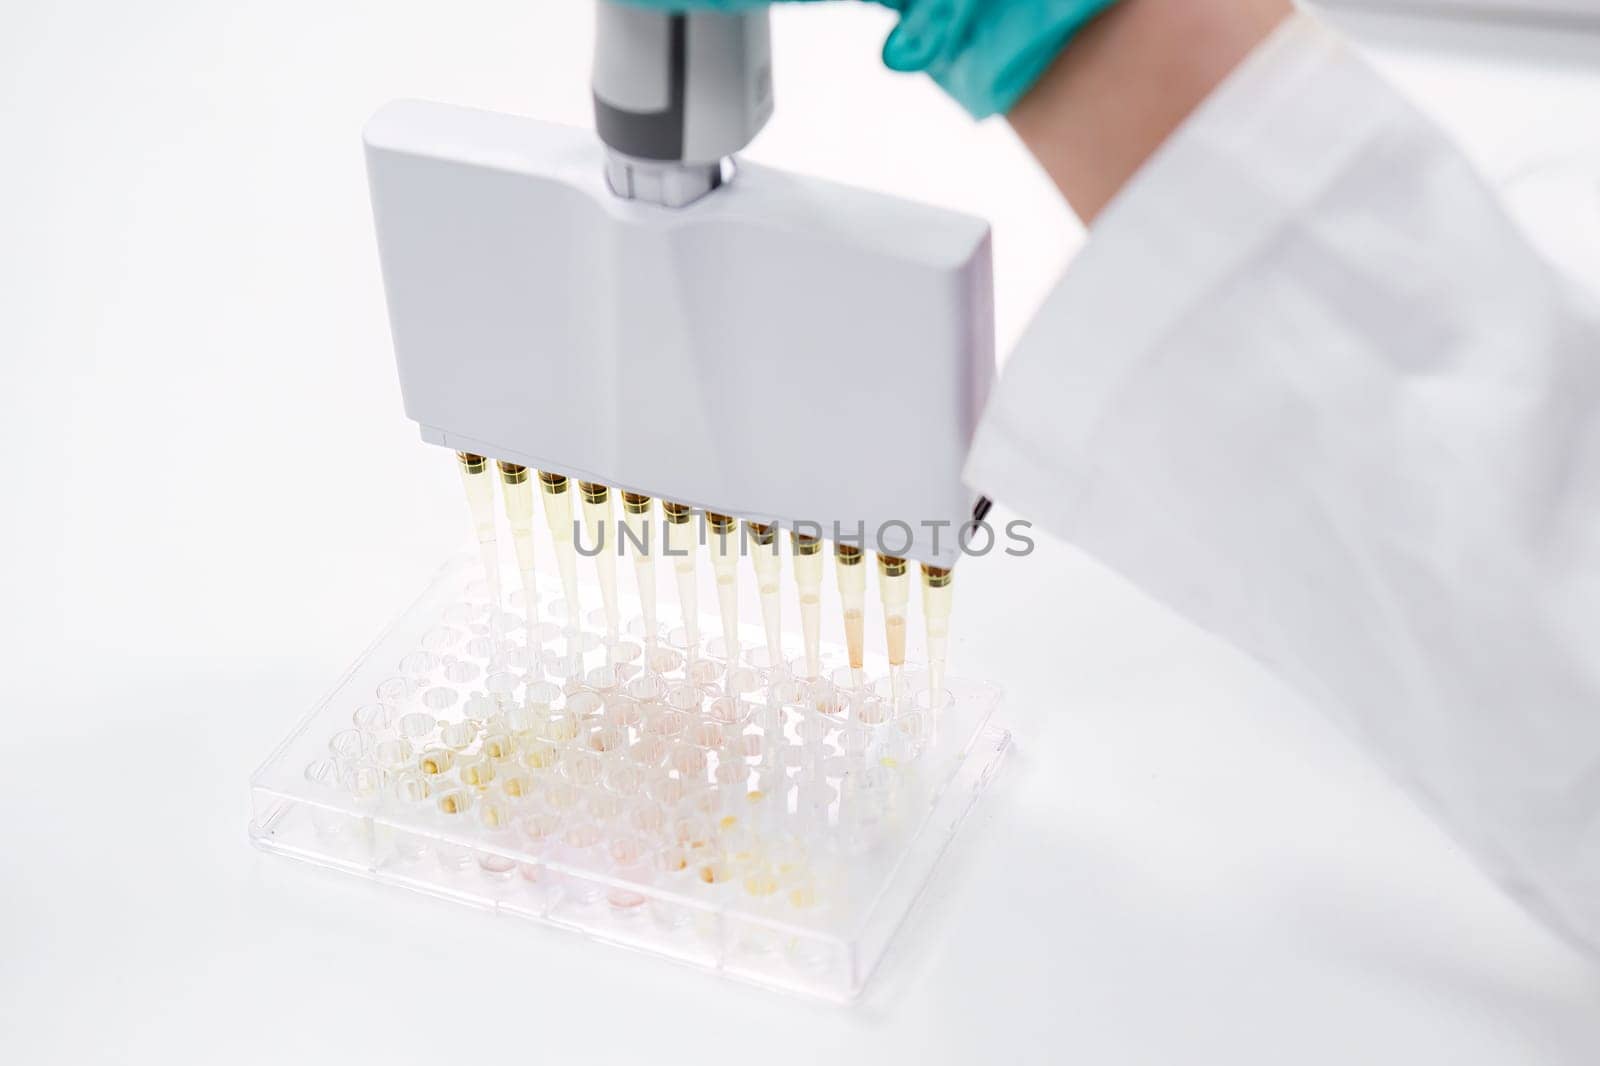 A multichannel pipette dispenser is used to load microplates for clinical diagnostic testing by vladimka